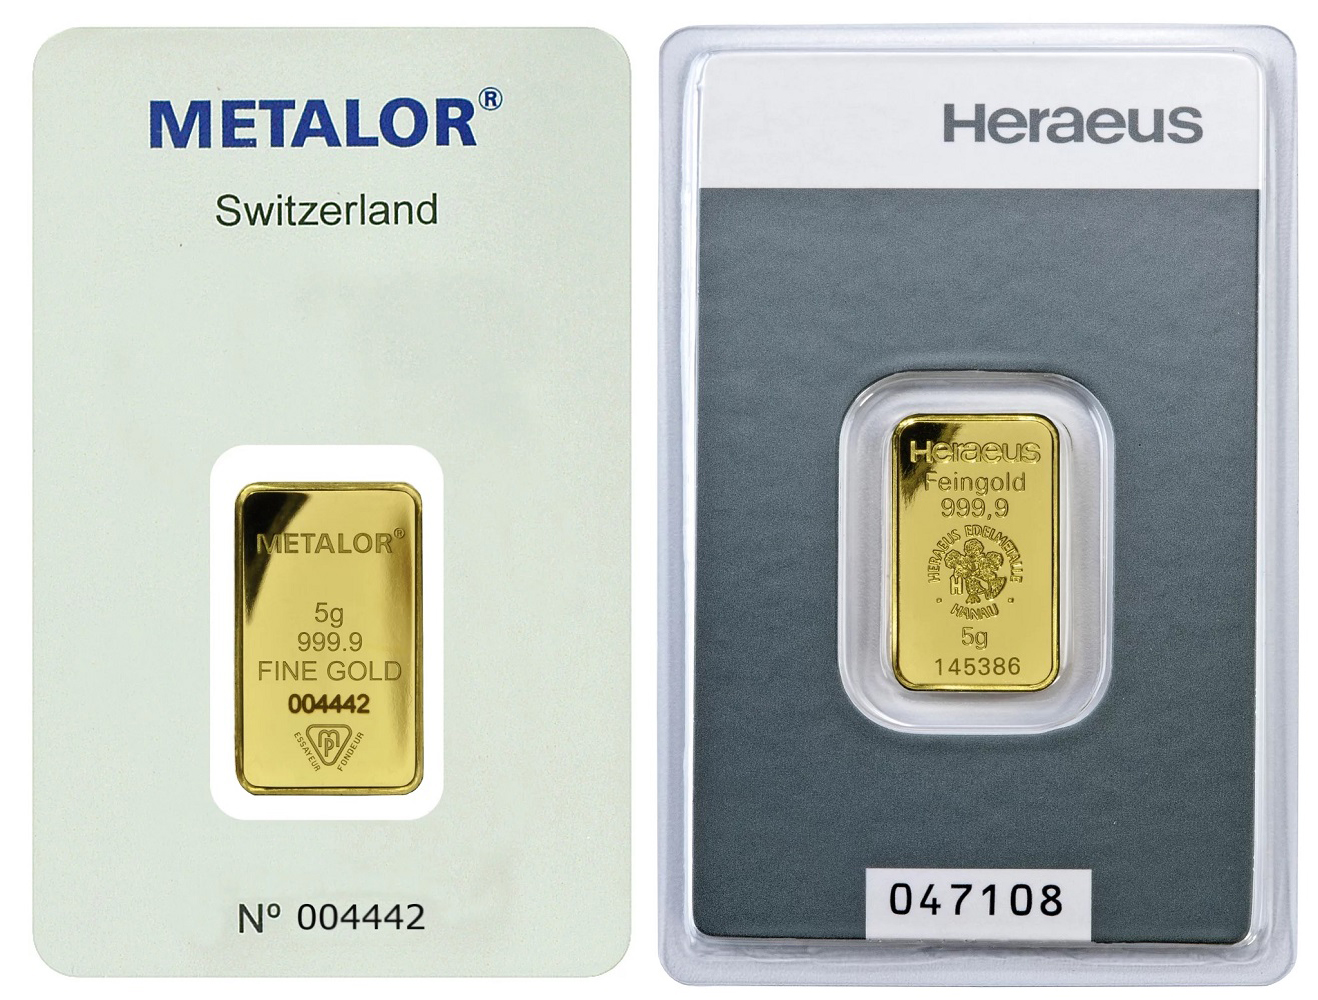 Sell 5g Gold Bars - Up to Â£201.12 - Sell 5g Gold Bars at Market Leading Prices | BullionByPost